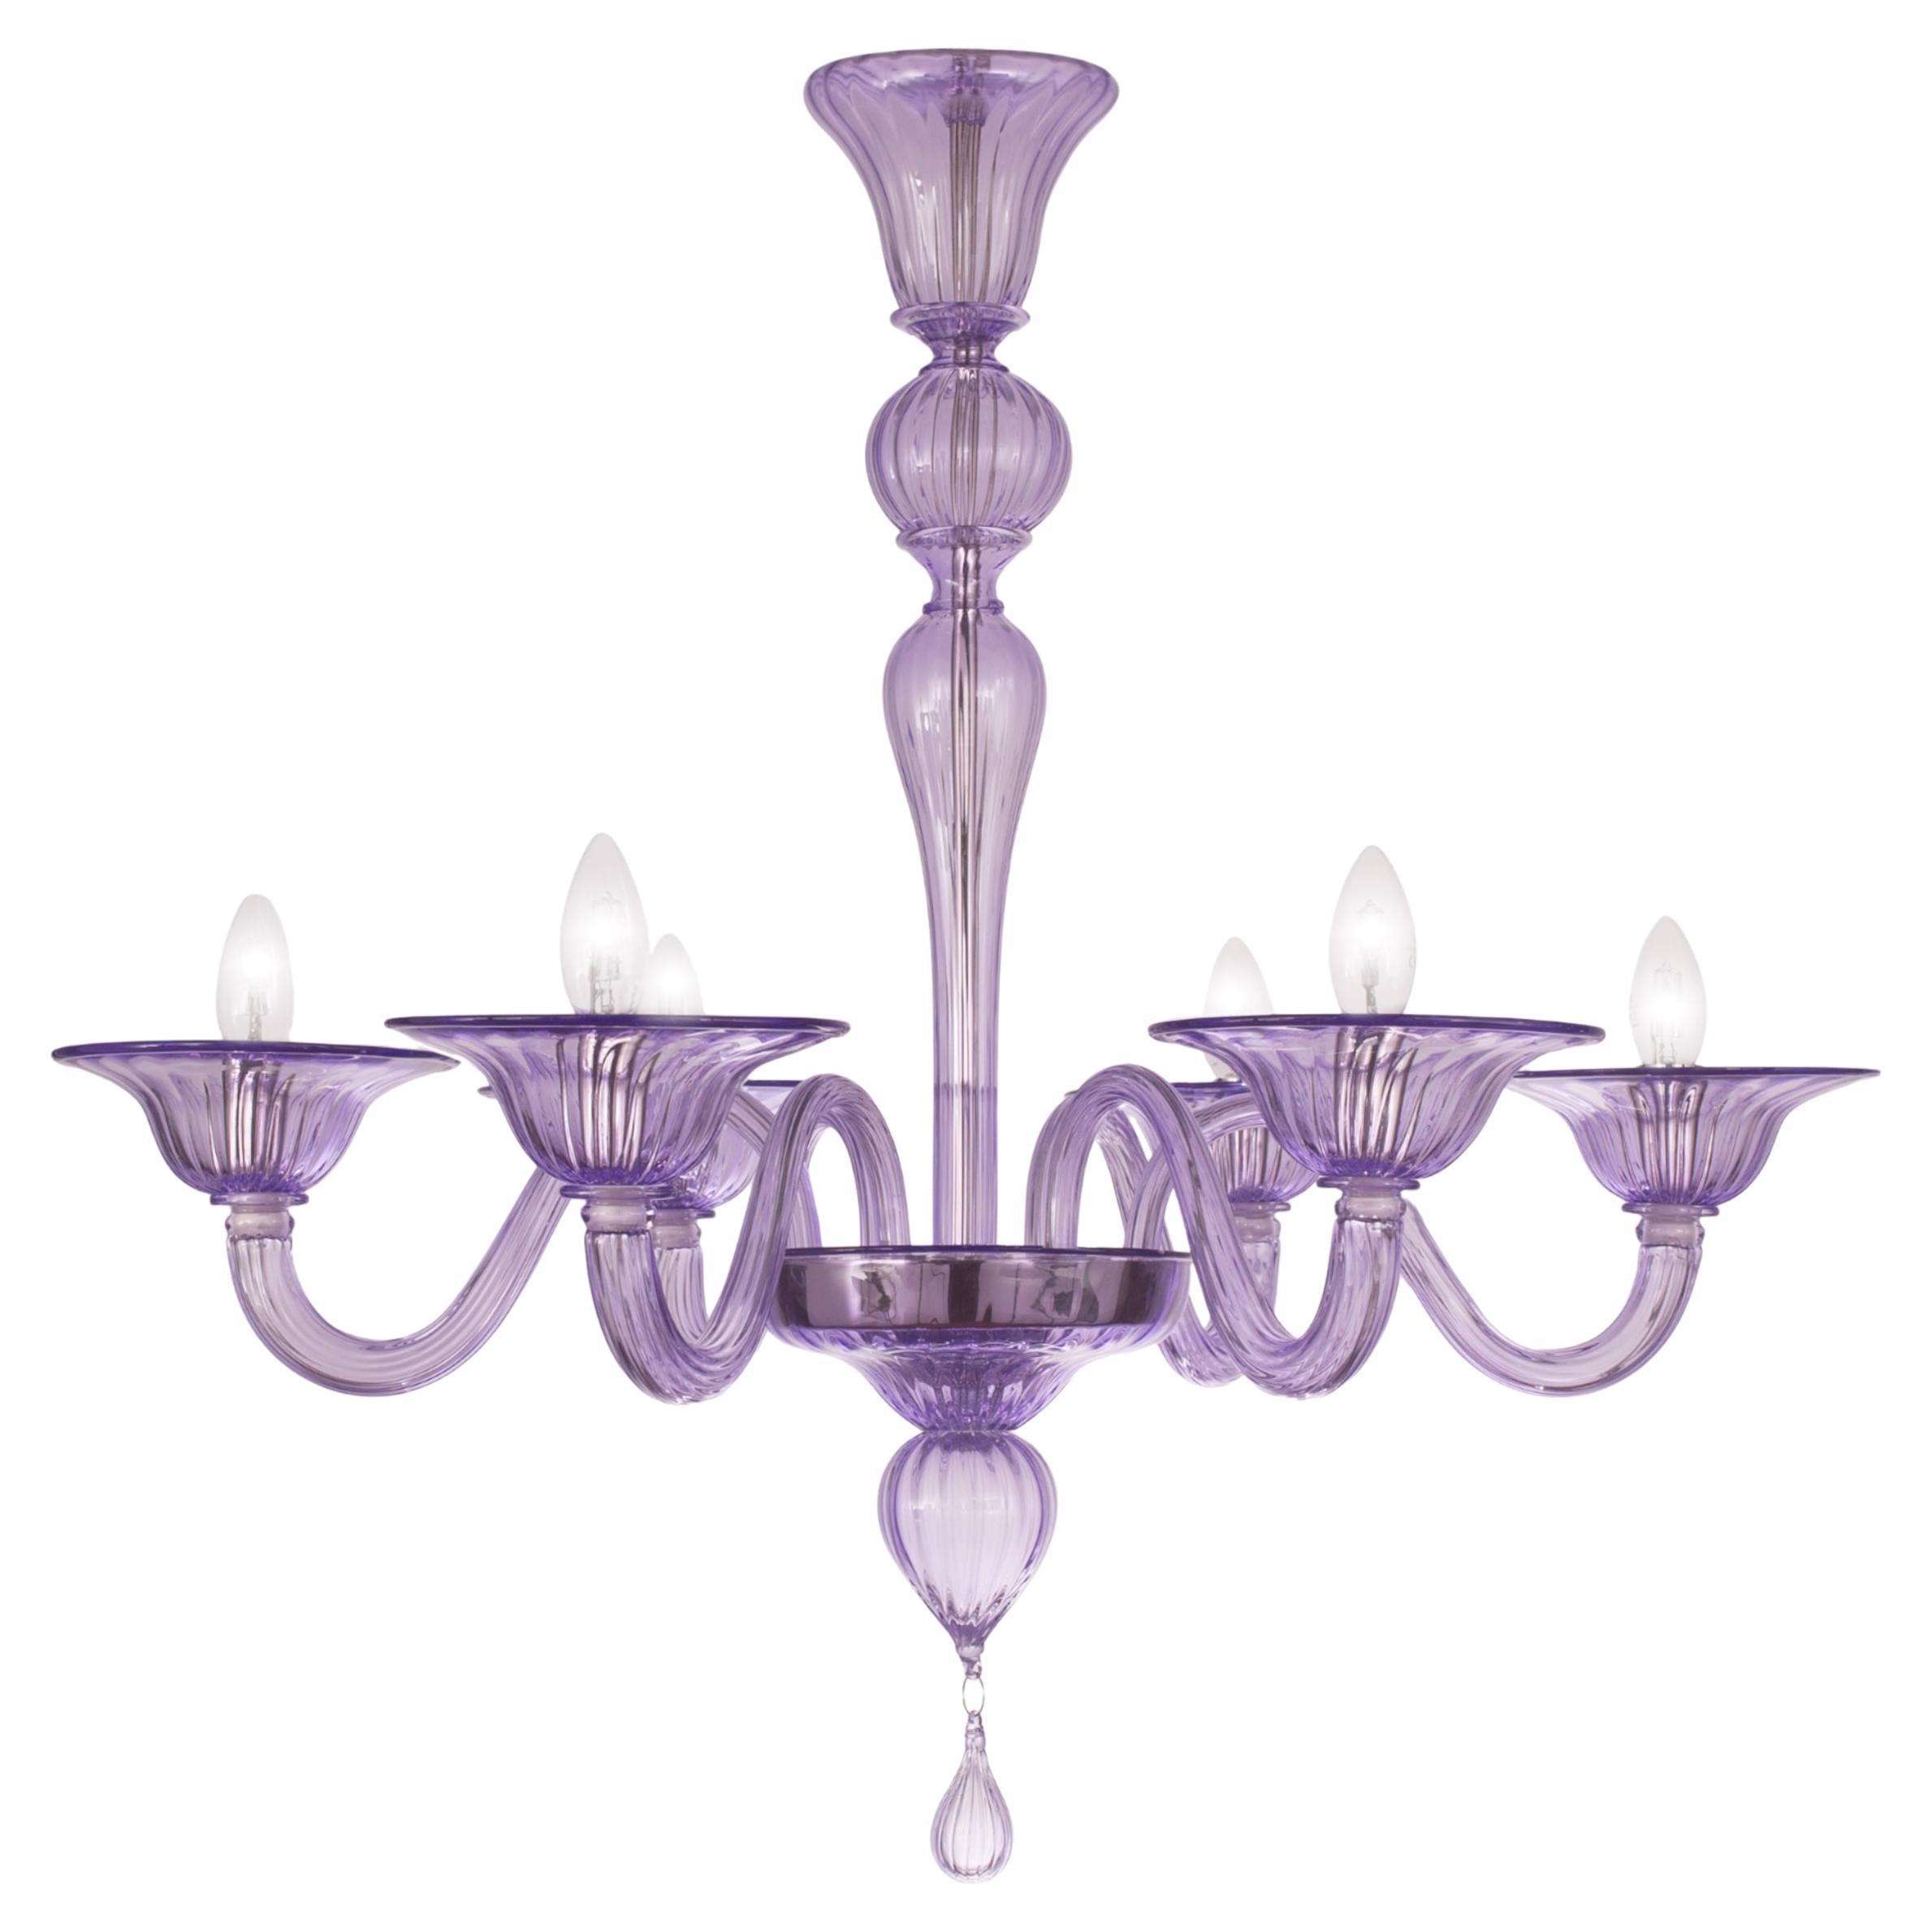 Simplicissimus Chandelier, 6 Arms lilac Murano Glass by Multiforme